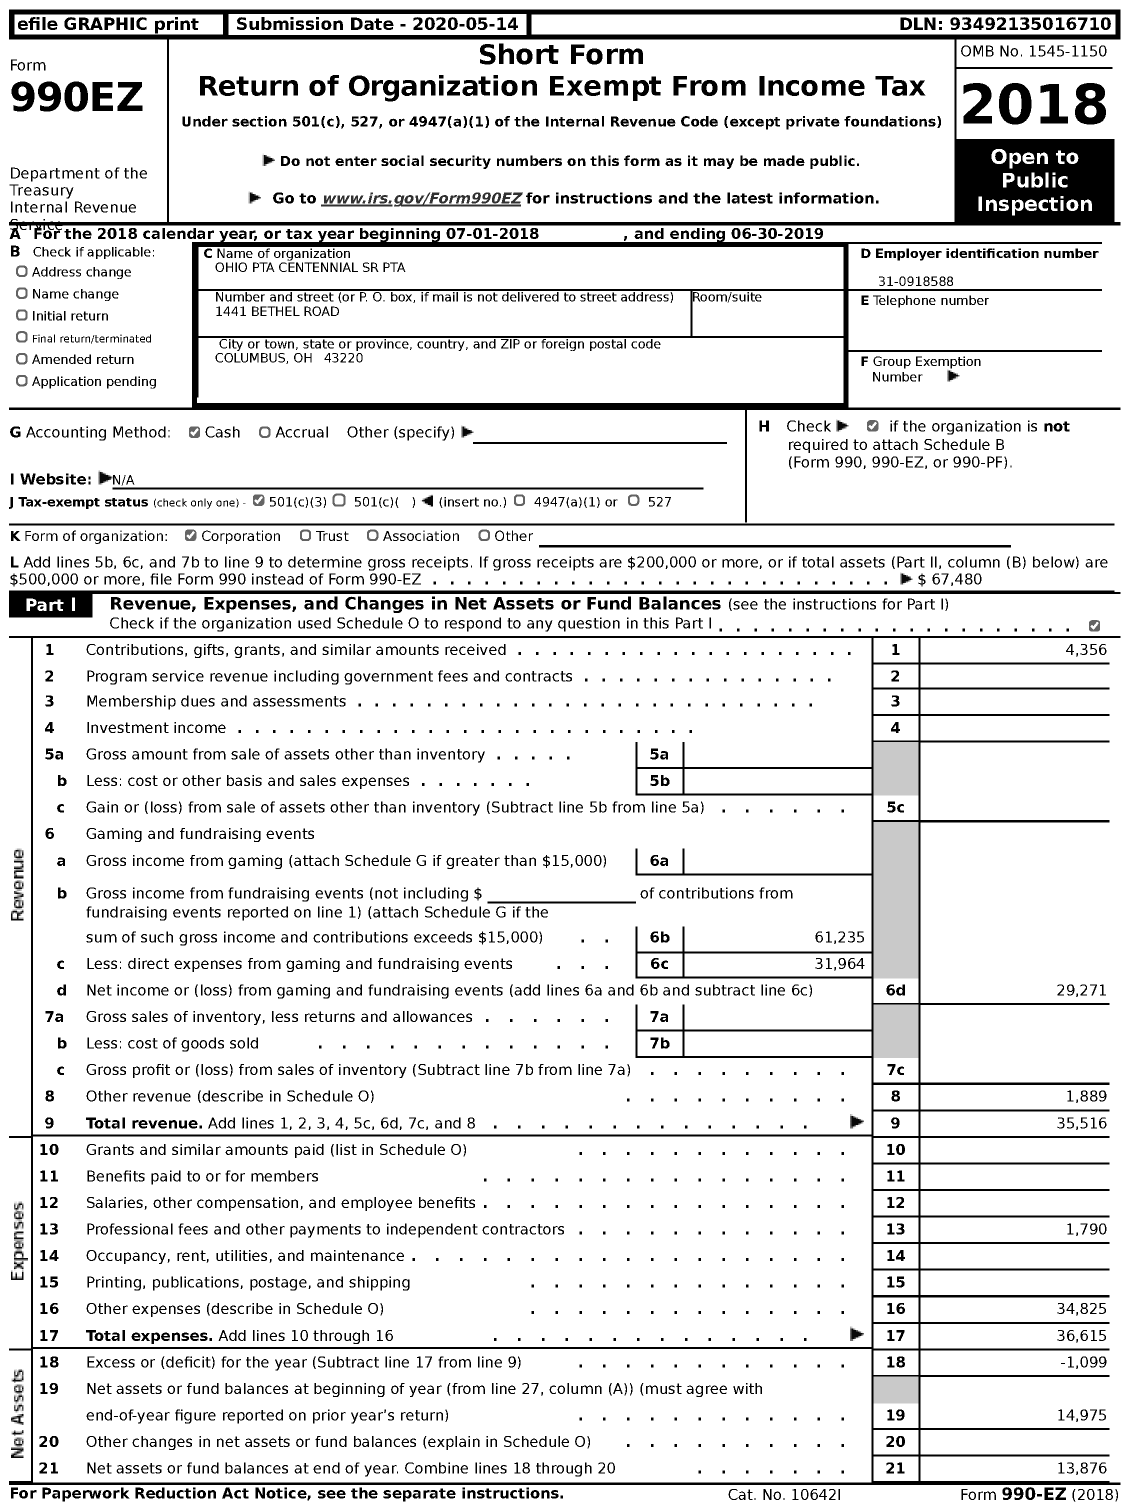 Image of first page of 2018 Form 990EZ for Ohio PTA Centennial SR PTA